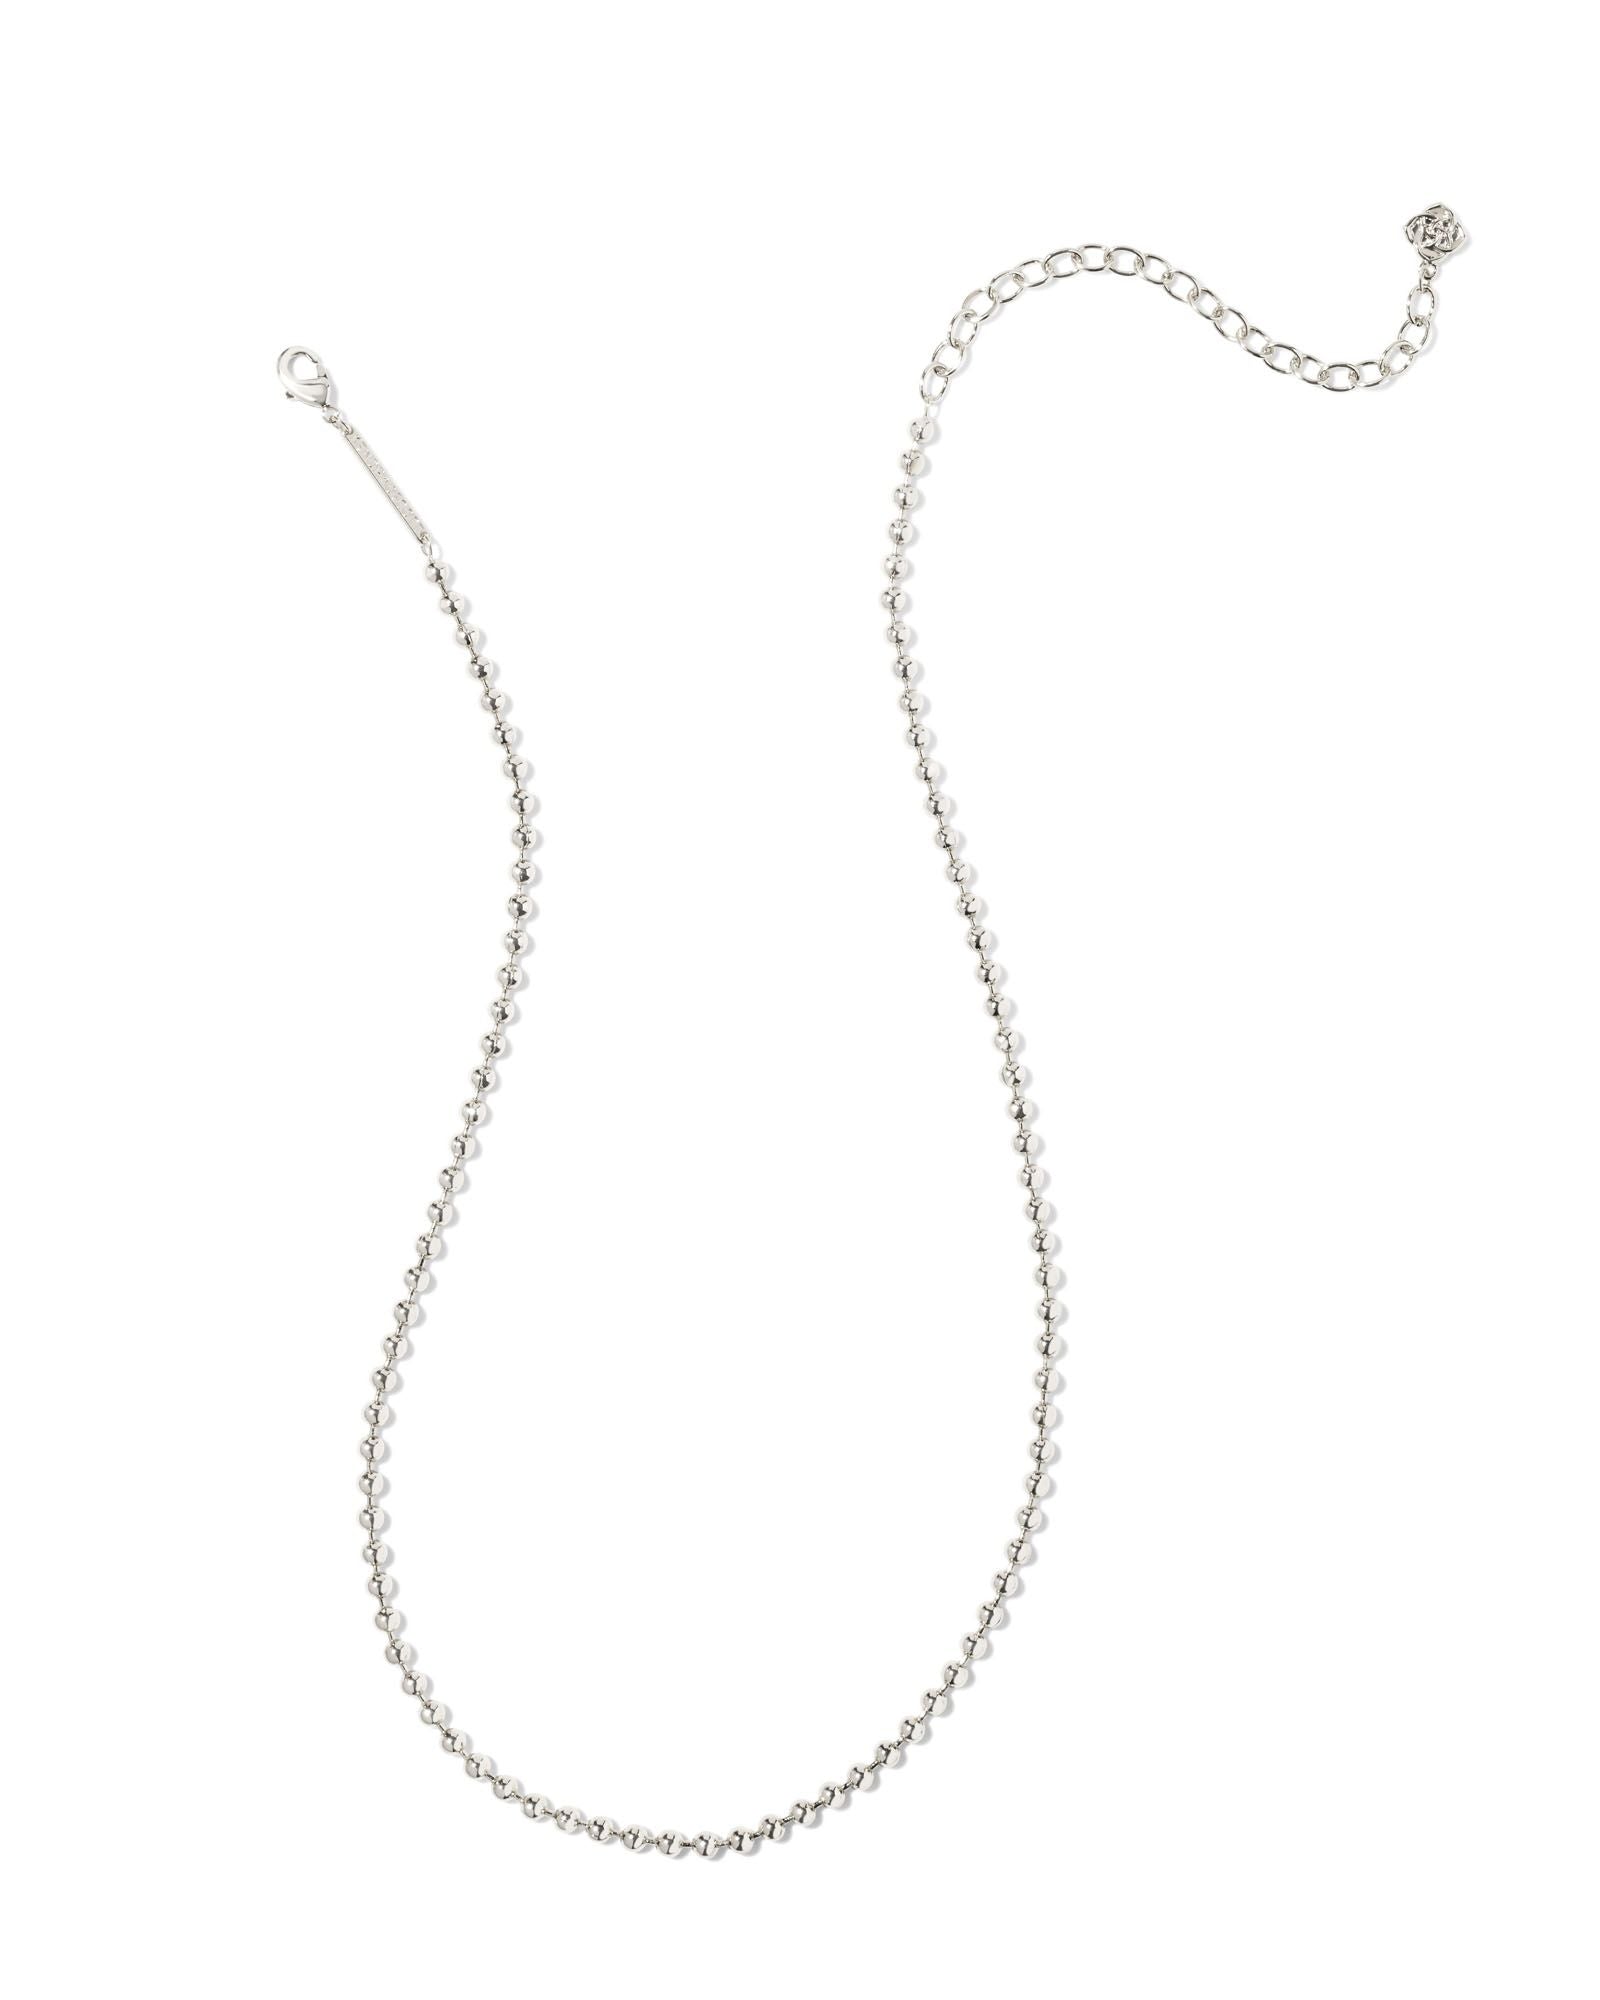 Oliver Chain Necklace in Rhodium Metal